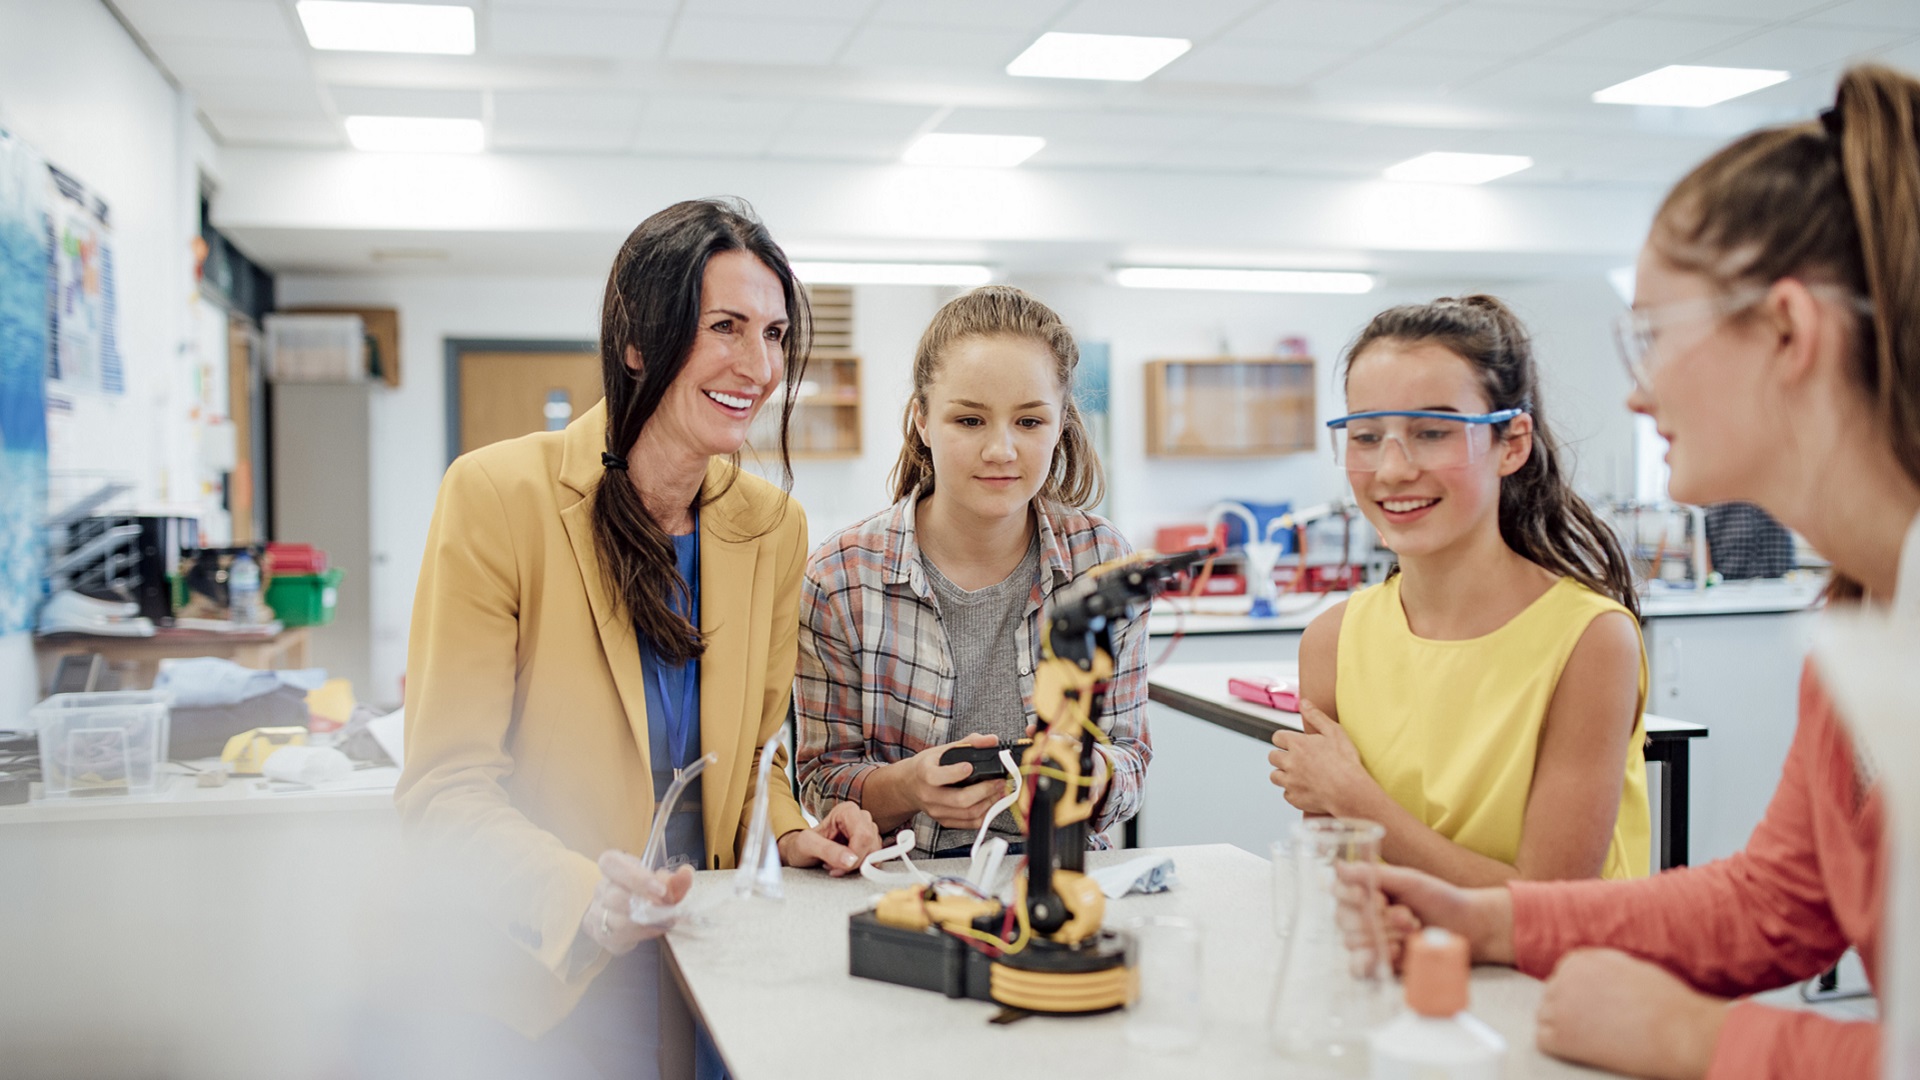 Point of view angle of teenage girls studying robotic arm in school.